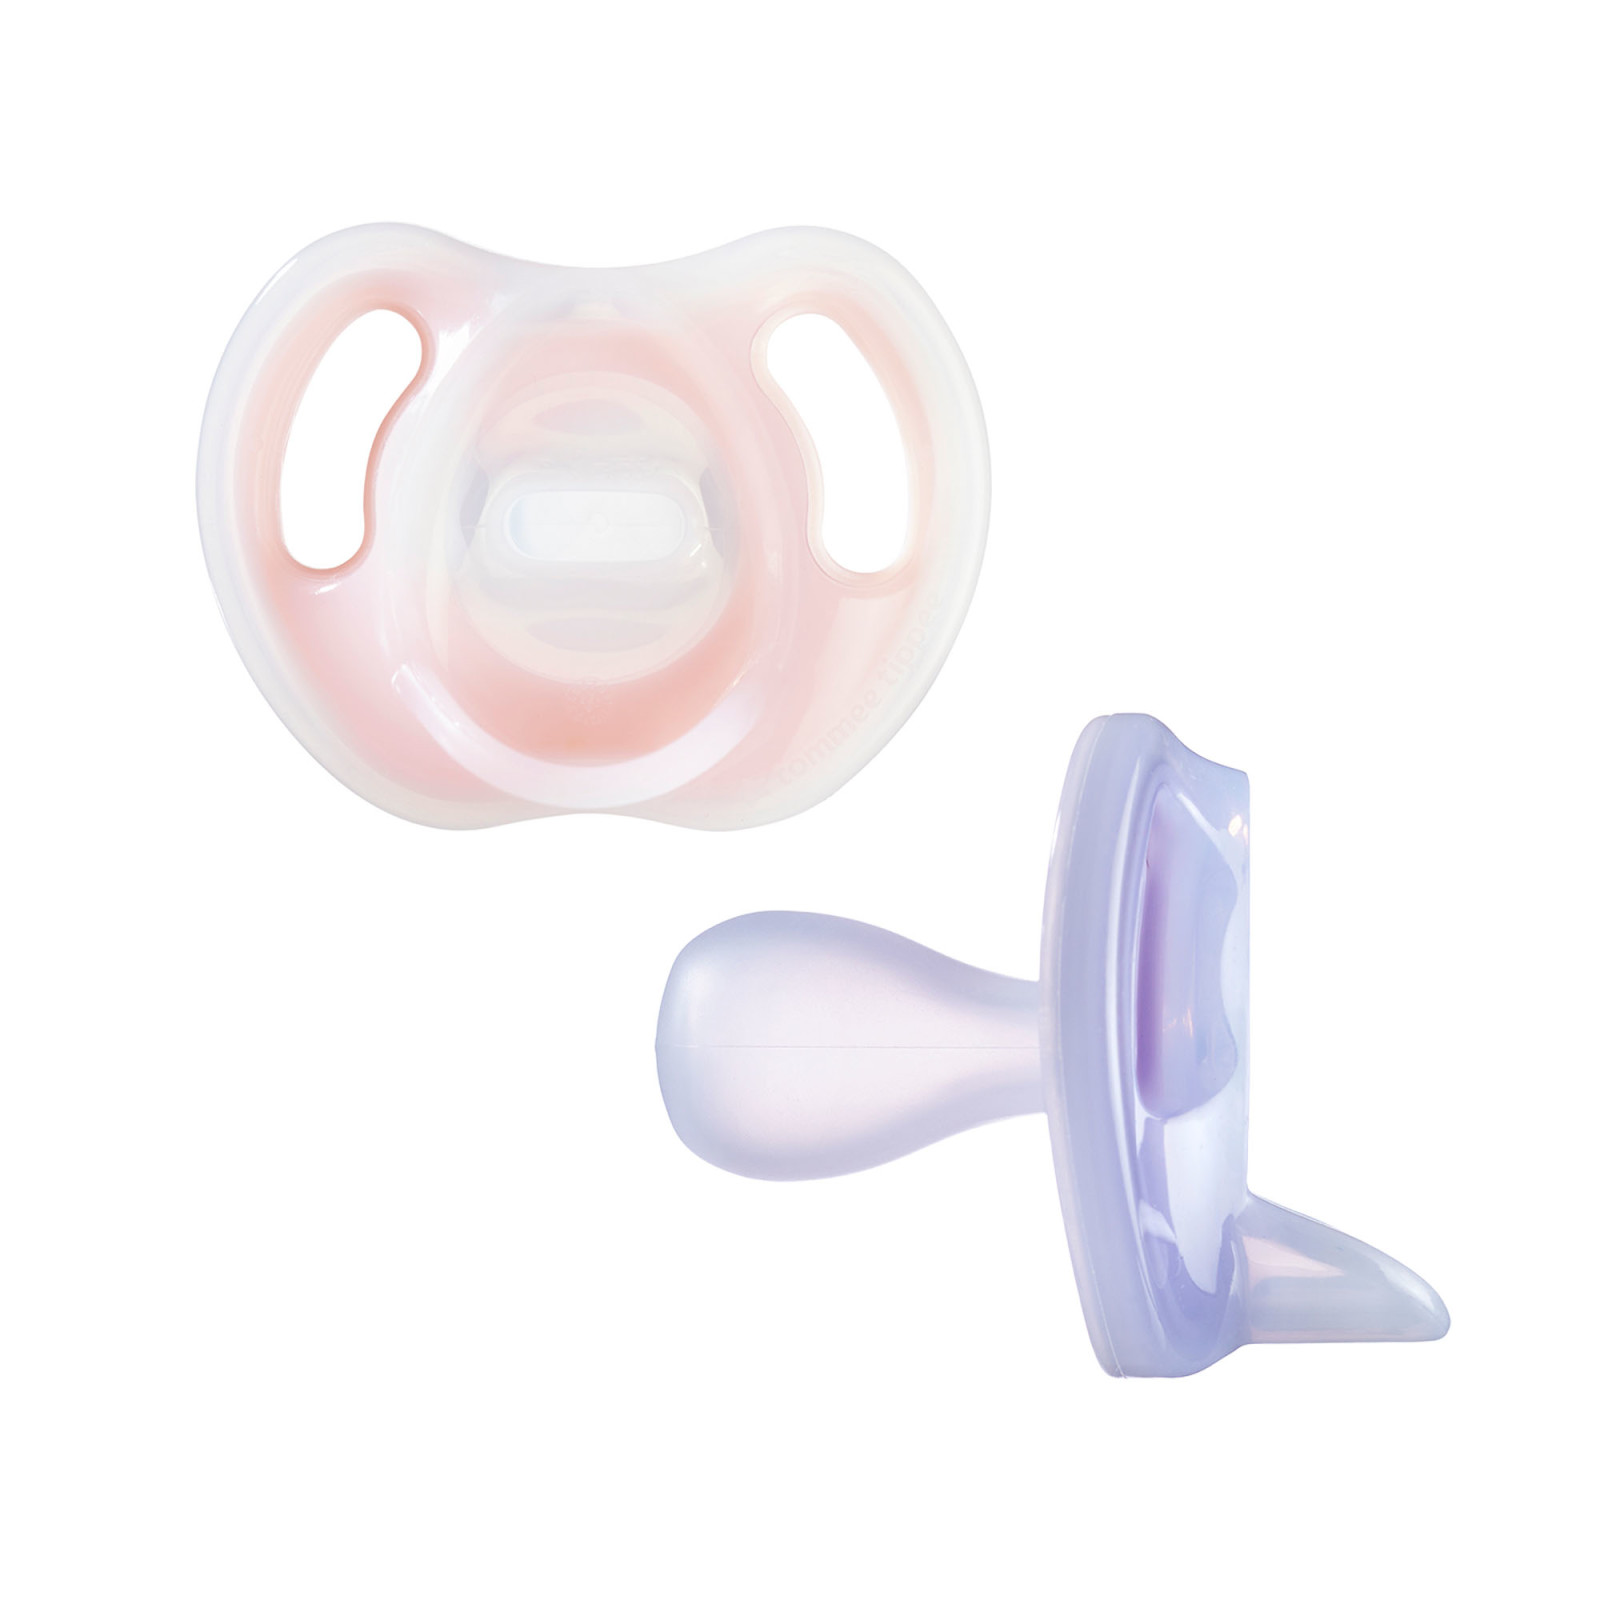 Tommee Tippee Ultra-Light Silicone Pacifier, 0-6 months, Symmetrical One-Piece Design, BPA-Free Silicone Binkies, Includes Sterilizer Box, 2 Pack - image 3 of 9